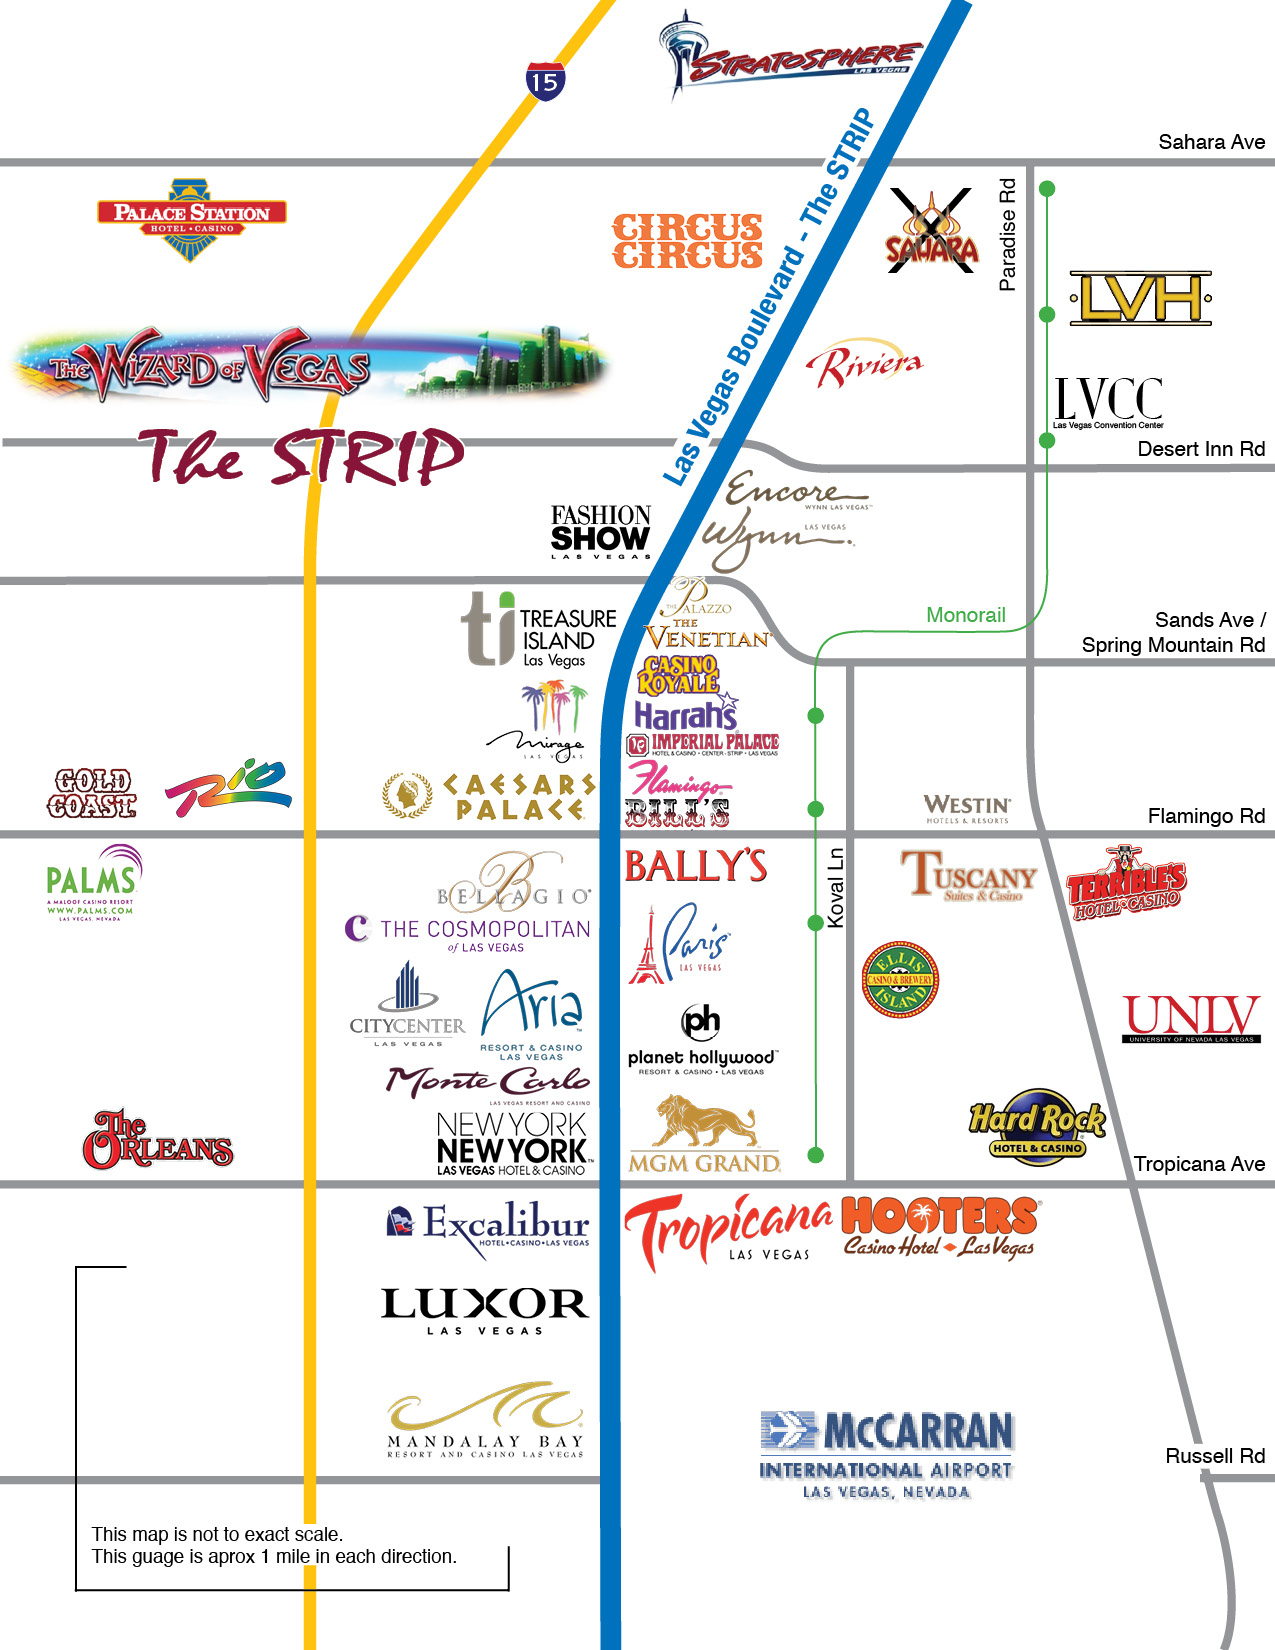 Map Of Las Vegas Strip Showing Hotels And Monorail 2018 